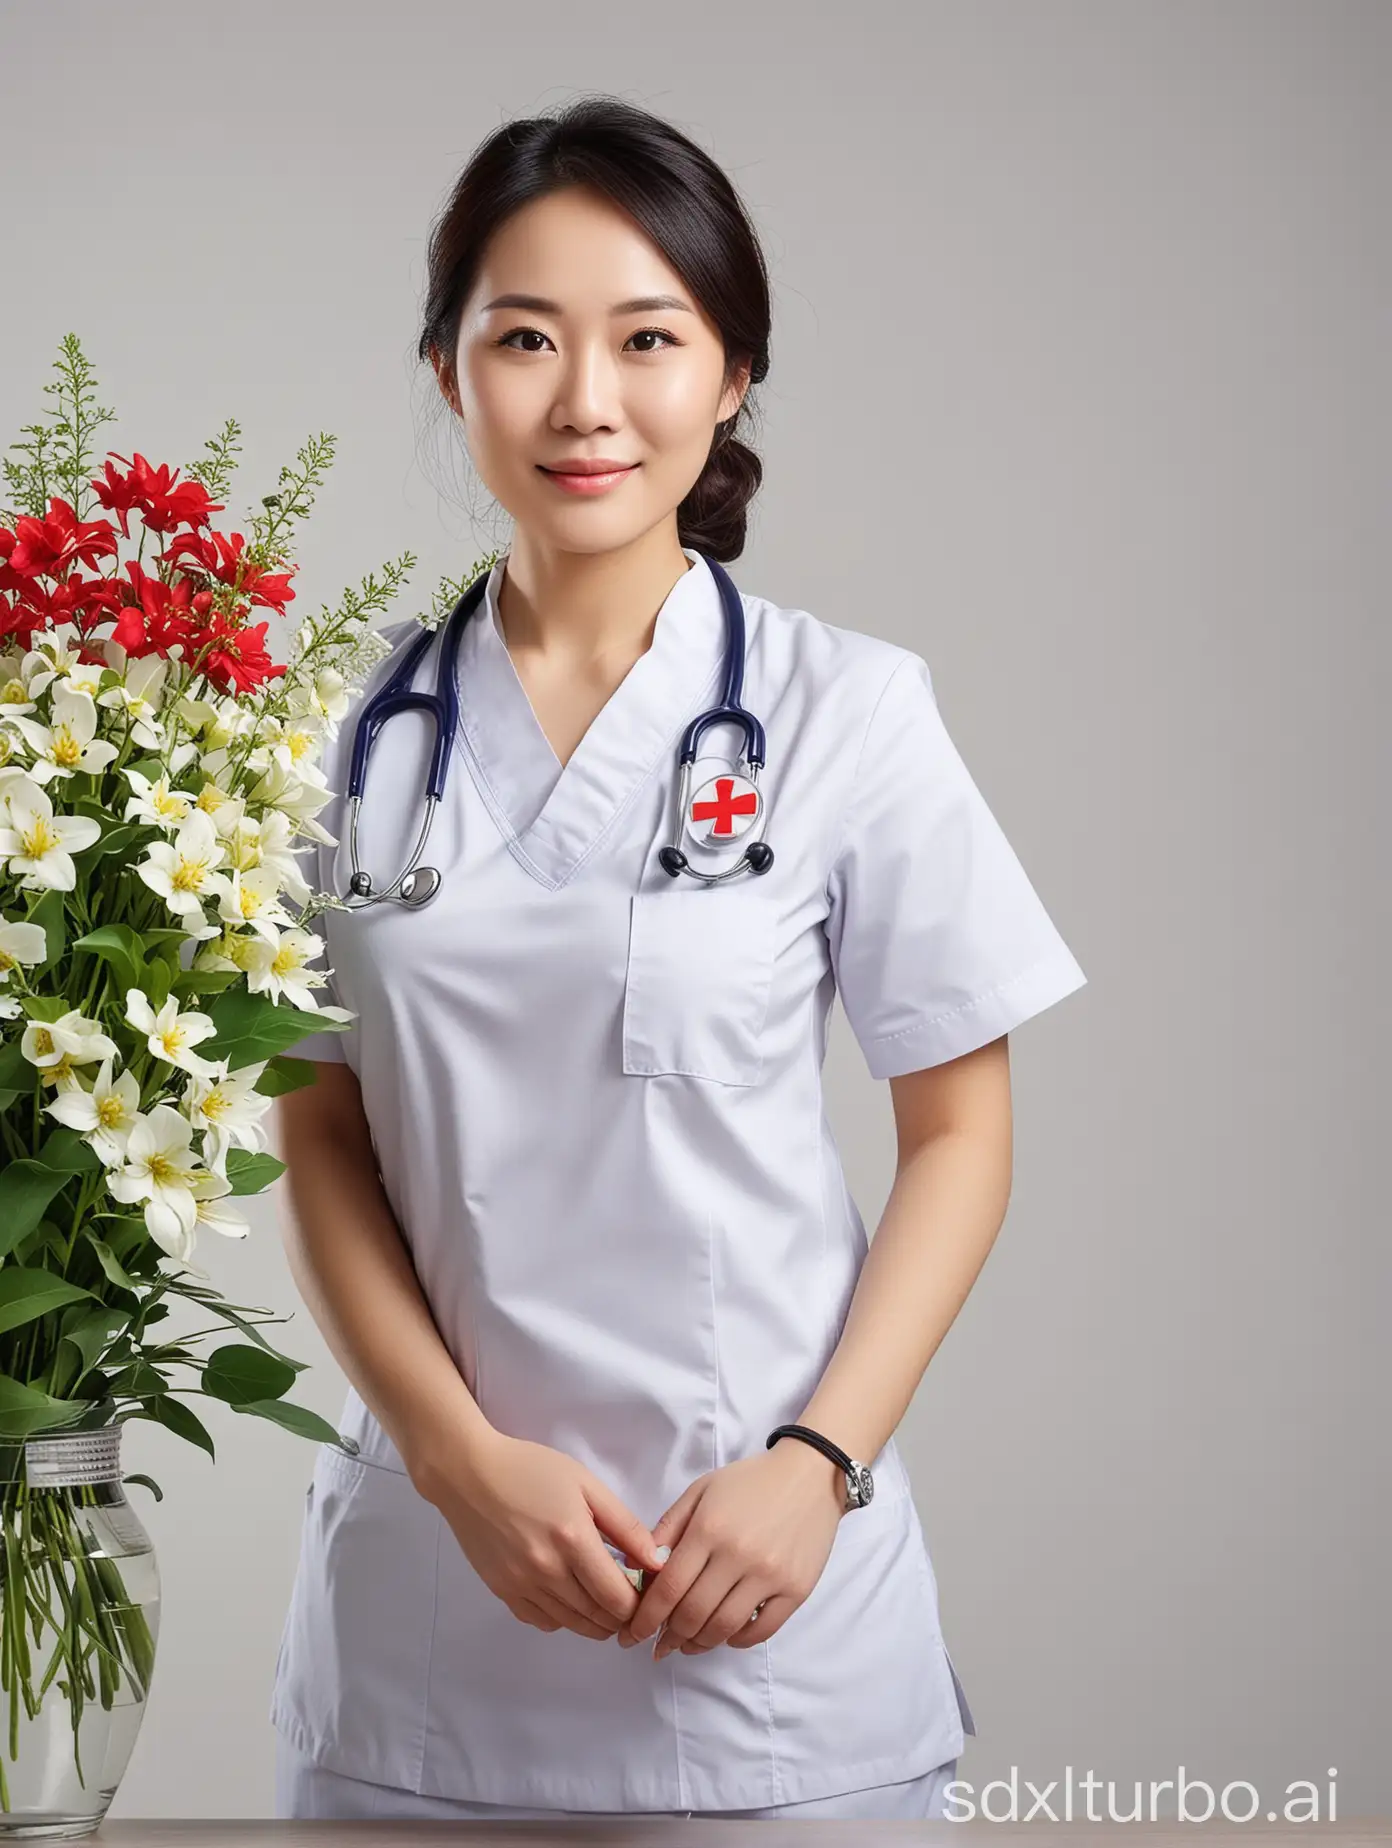 White background, Chinese Nurse, medical uniform, healthcare, cancellation, Nurse's Day, assessment, discrimination, professionalism, clinical setting, stethoscope, medicine, patient care, floral bouquet, positive decoration, application, soft lighting, high resolution, detailed